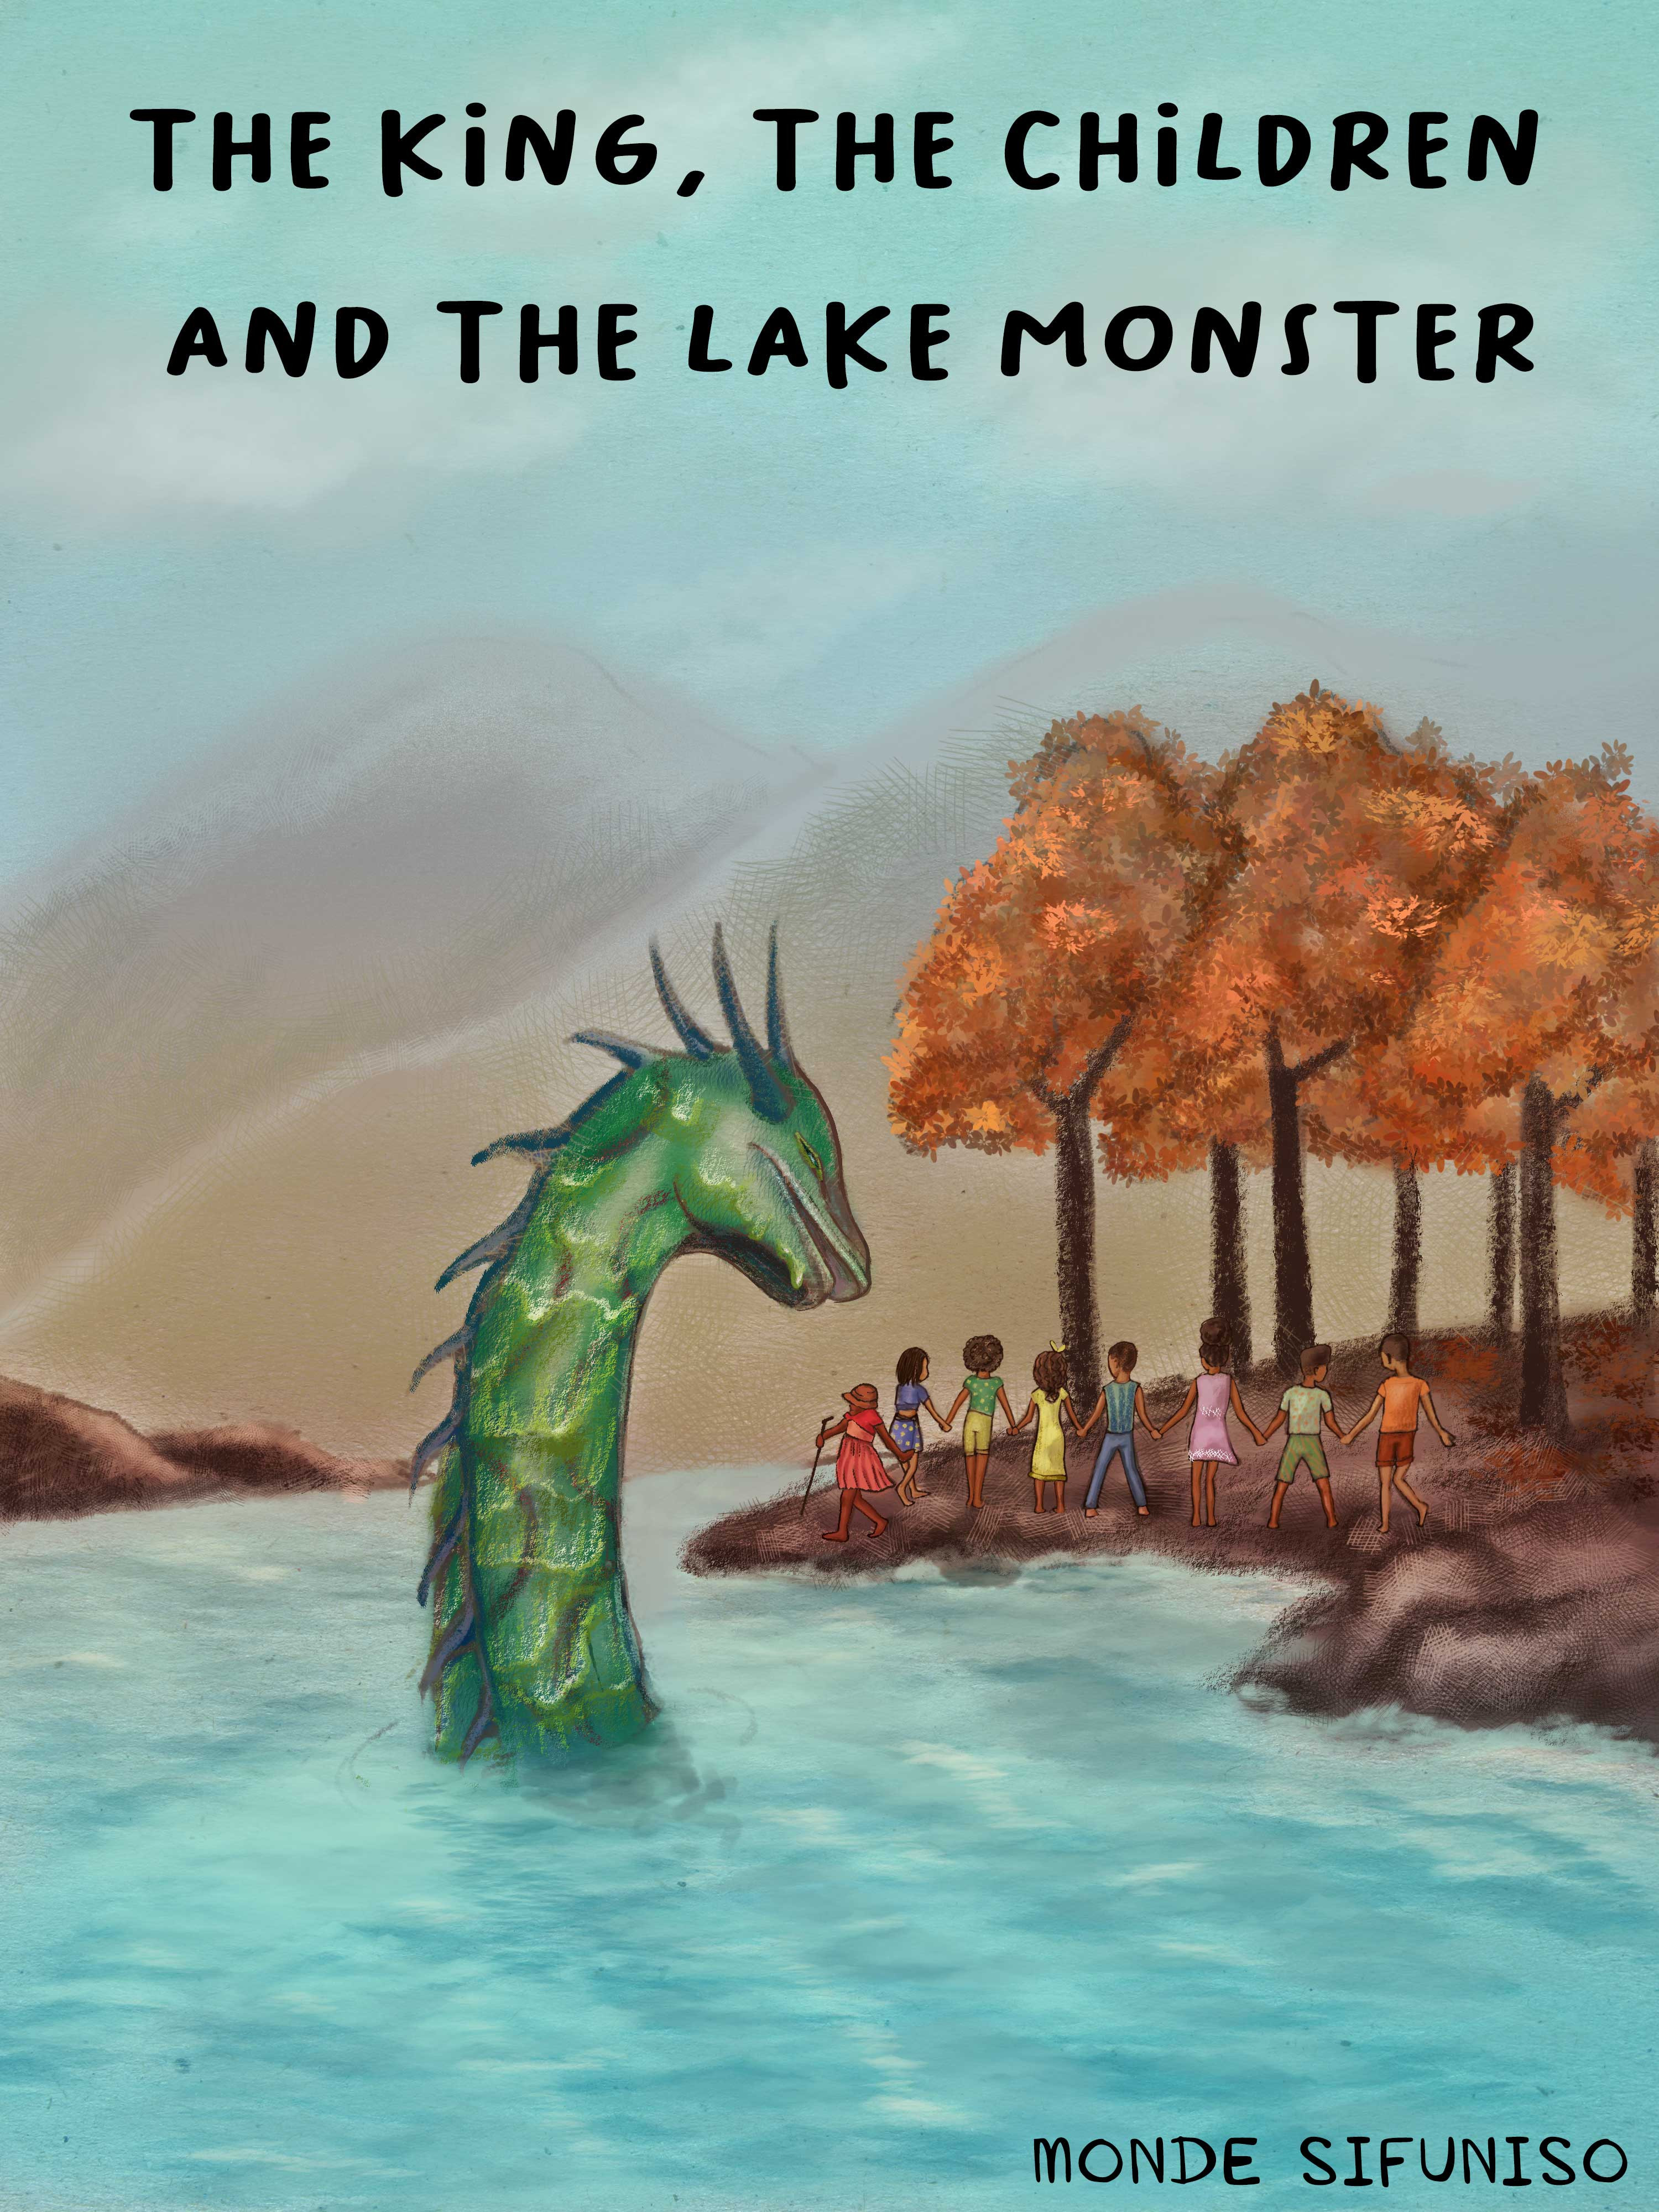 The King, The Children, and The Lake Monster